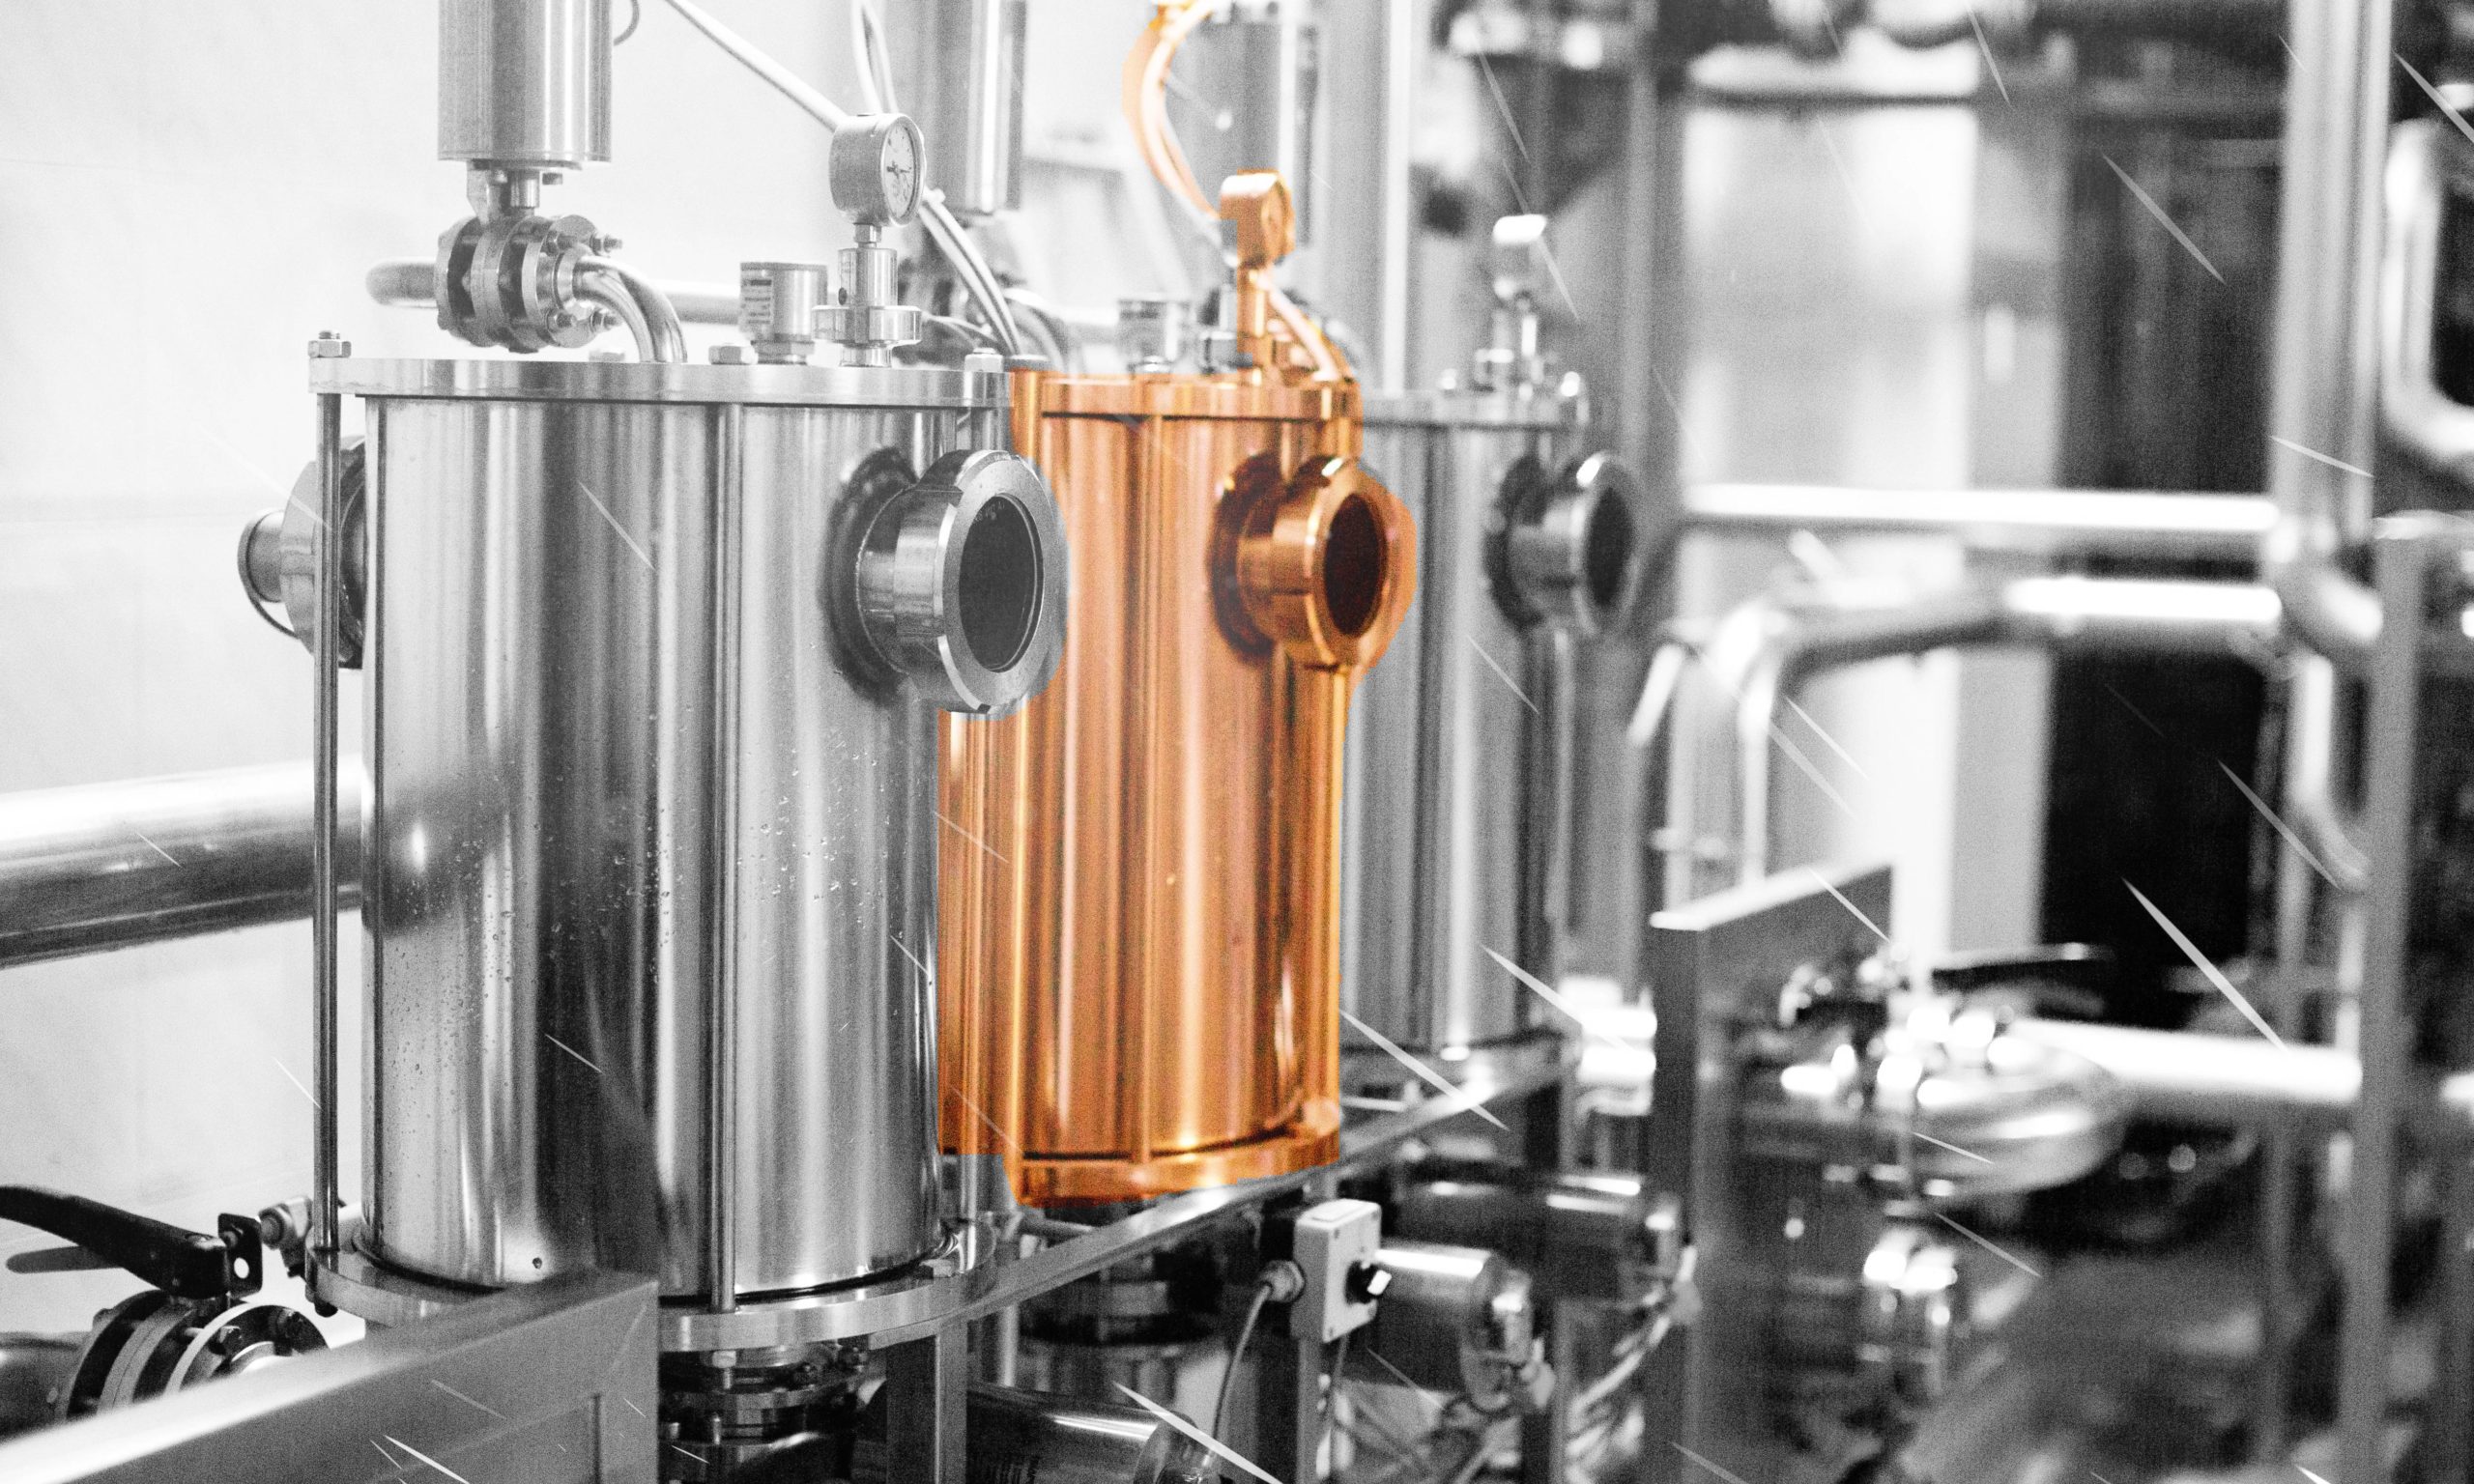 A distillery in with 3 copper pot stills in black and white. The second pot still is fully colored in copper.